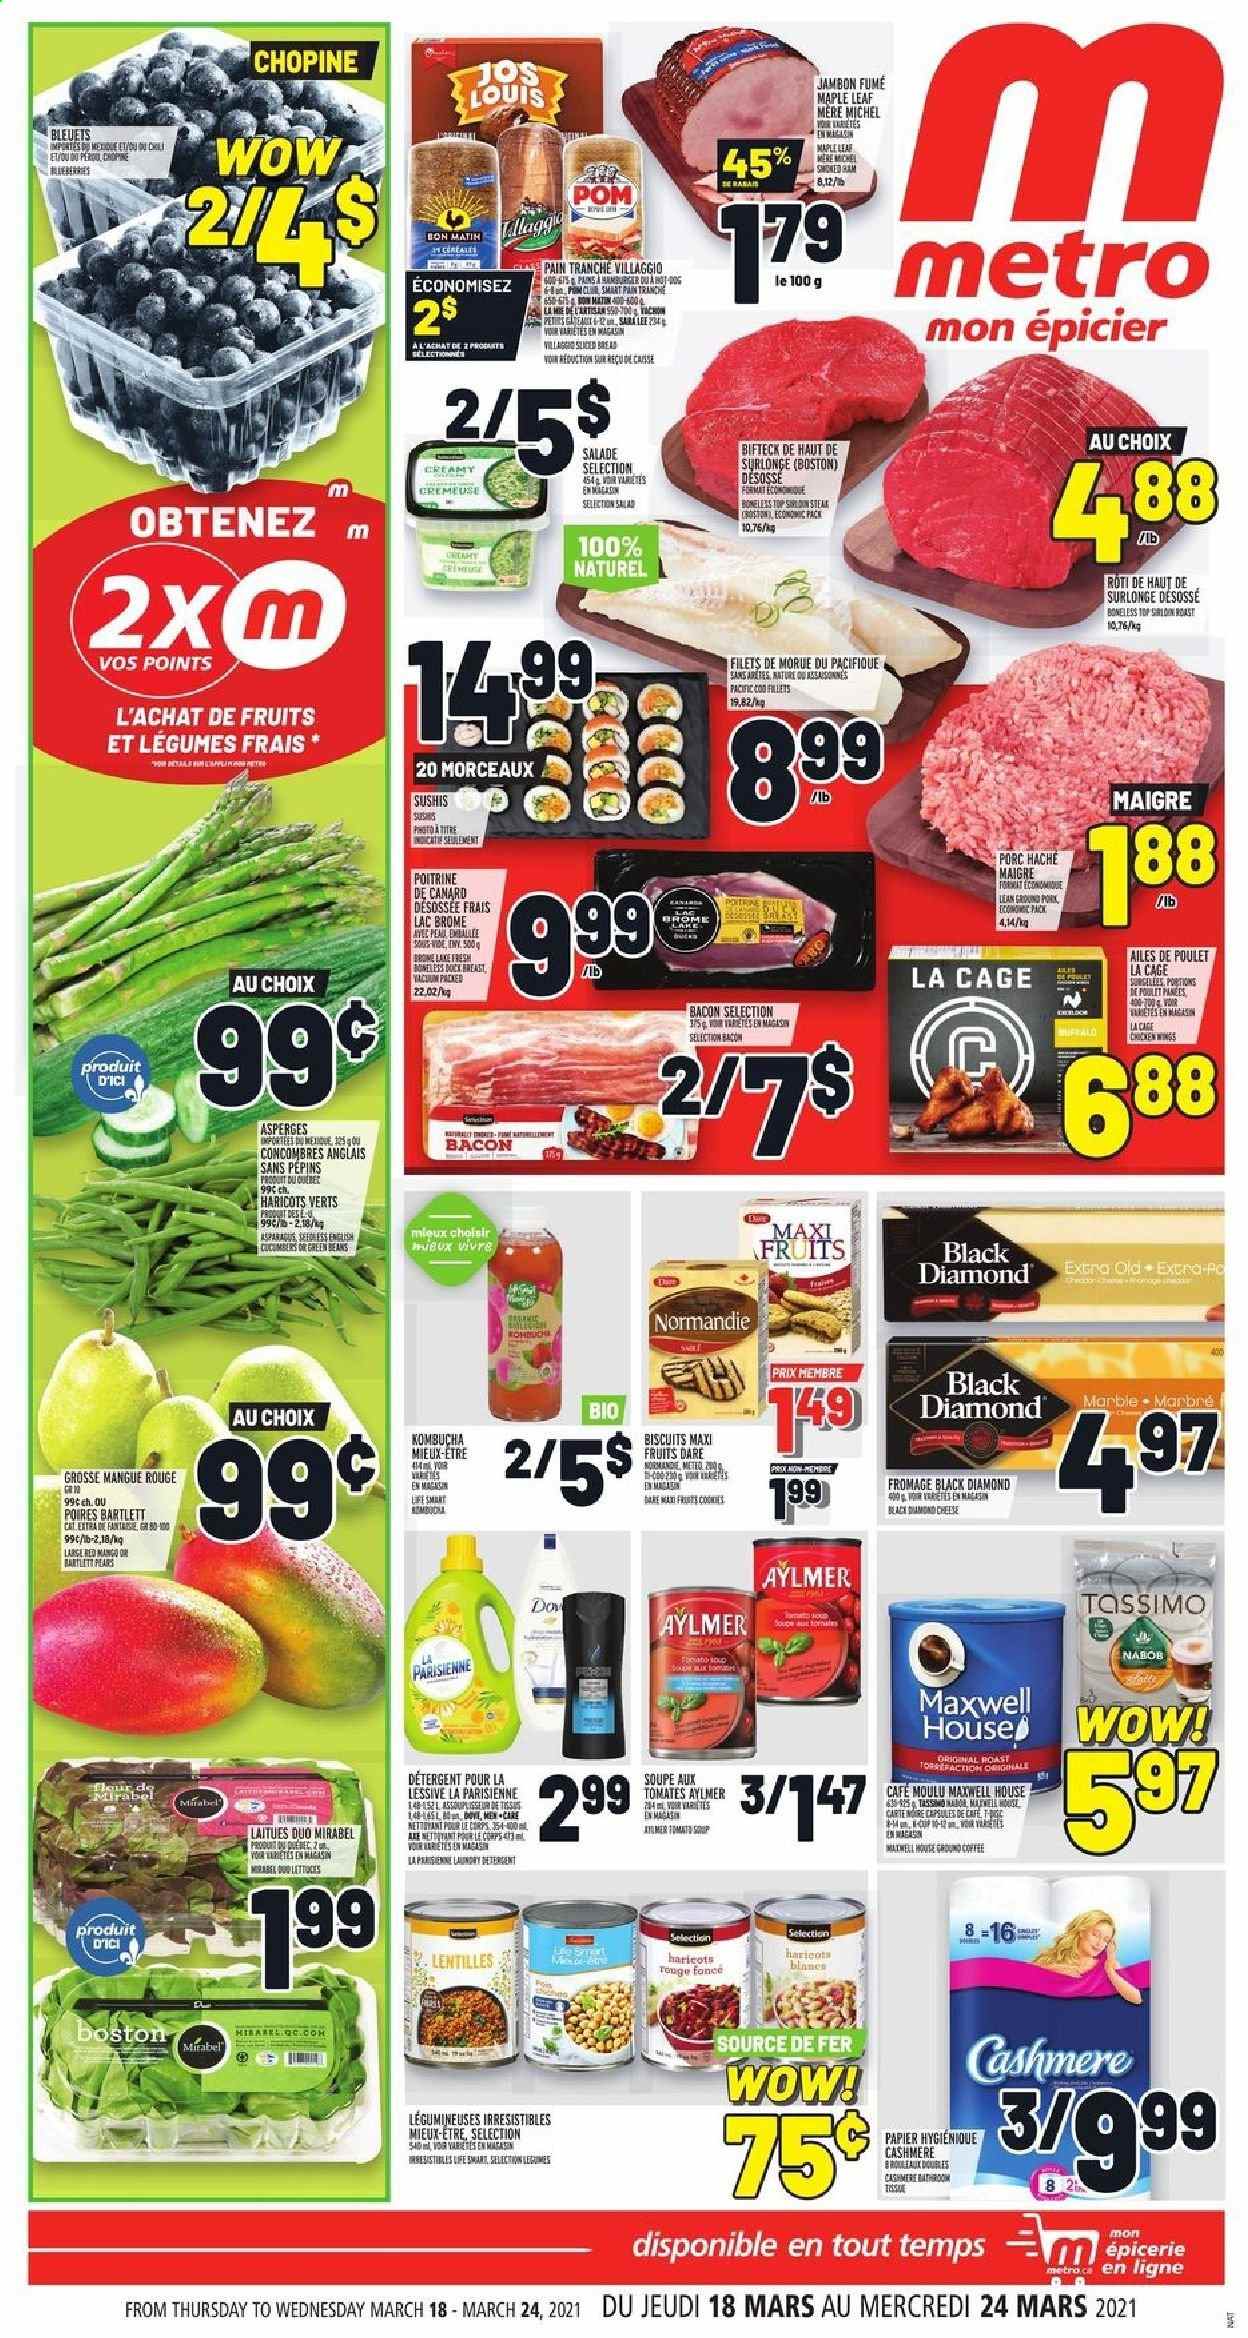 thumbnail - Metro Flyer - March 18, 2021 - March 24, 2021 - Sales products - cucumber, green beans, salad, mango, pears, cod, soup, bacon, cheese, Mars, biscuit, kombucha, Maxwell House, coffee, ground pork, cage. Page 1.